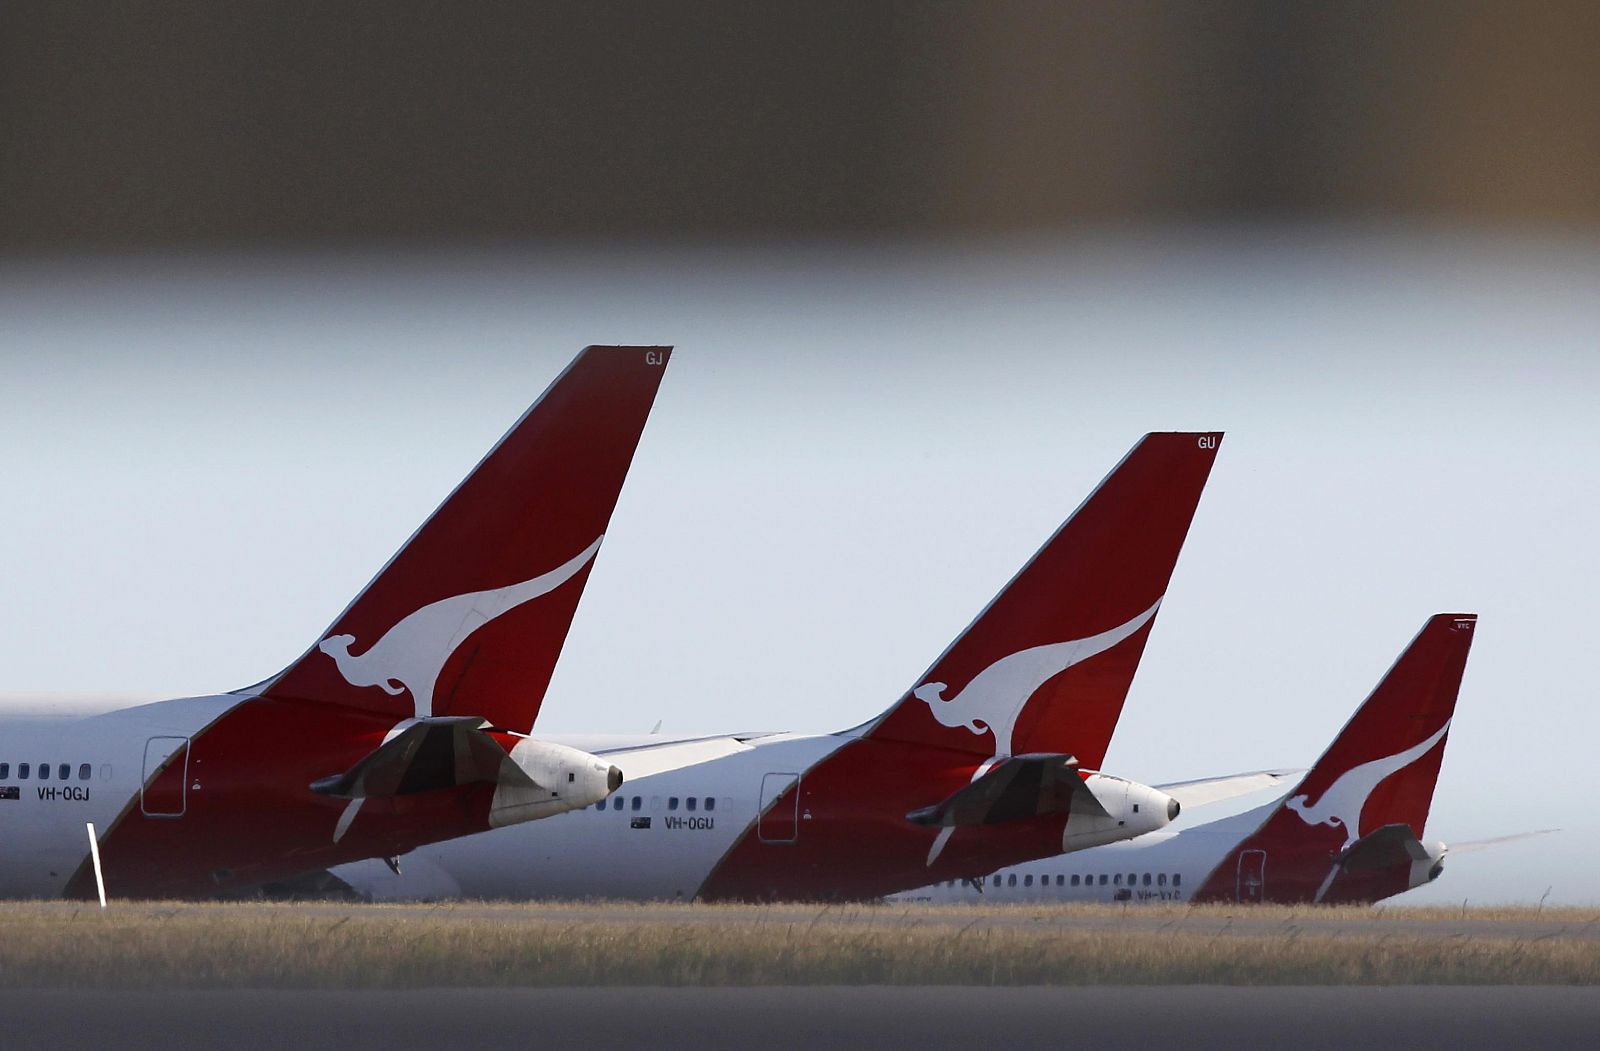 Qantas planes are seen grounded at Perth international airport